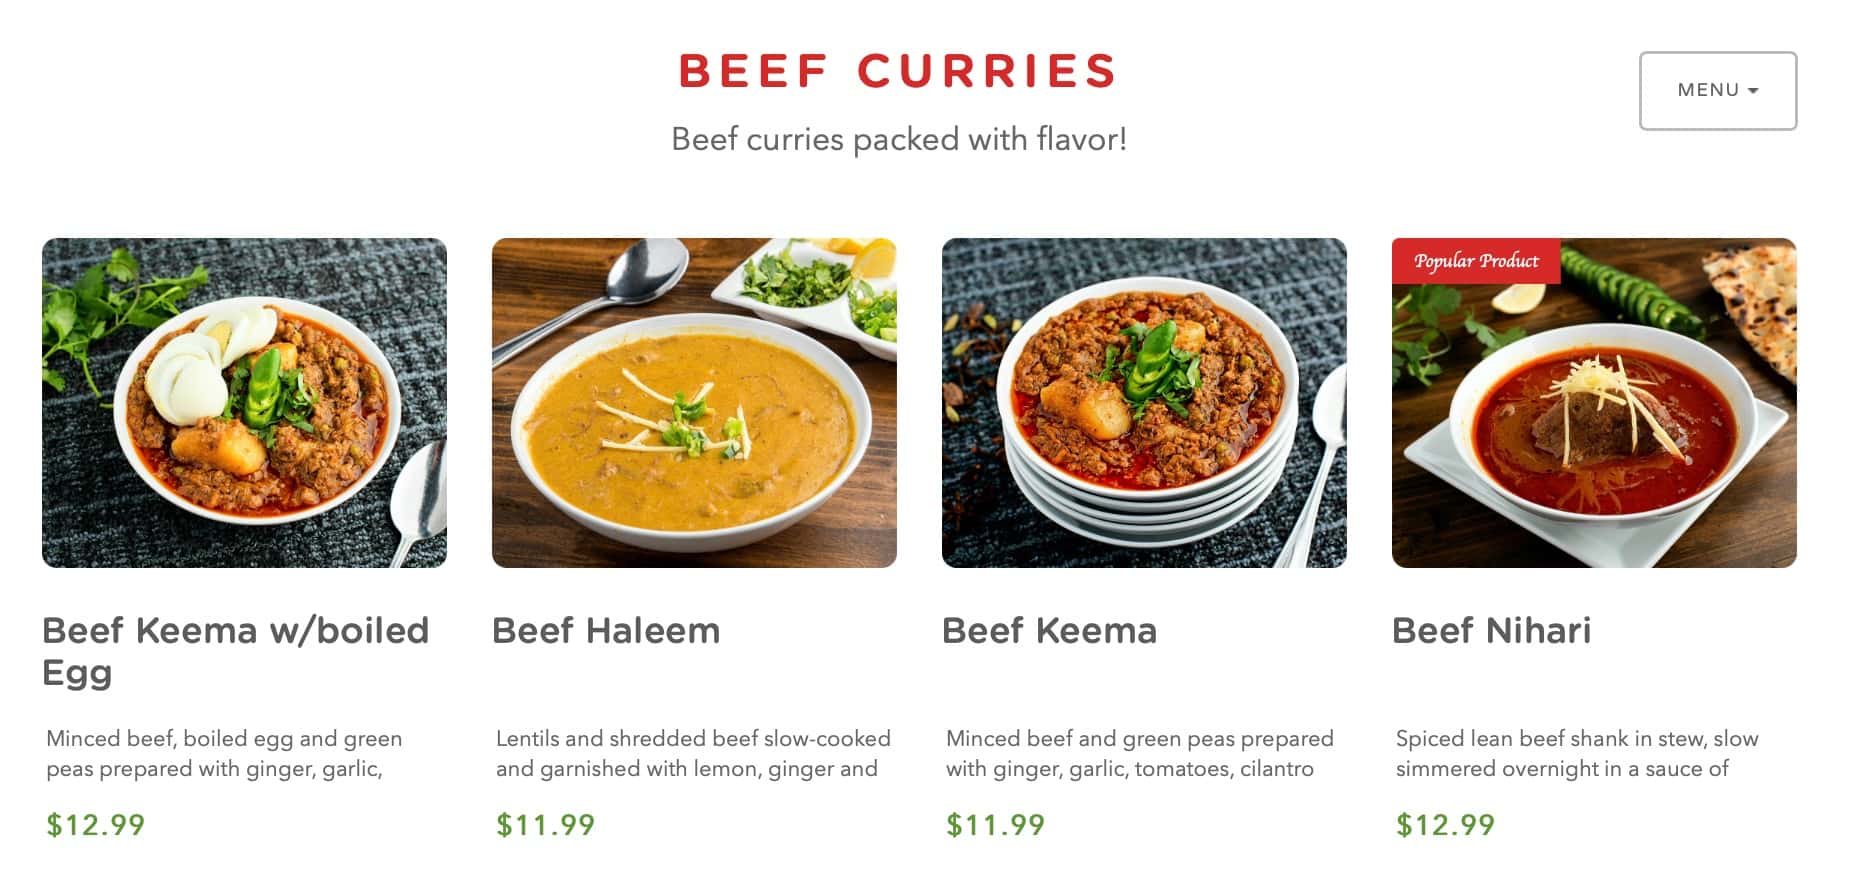 Aga's Restaurant and Catering Beef Curries Menu